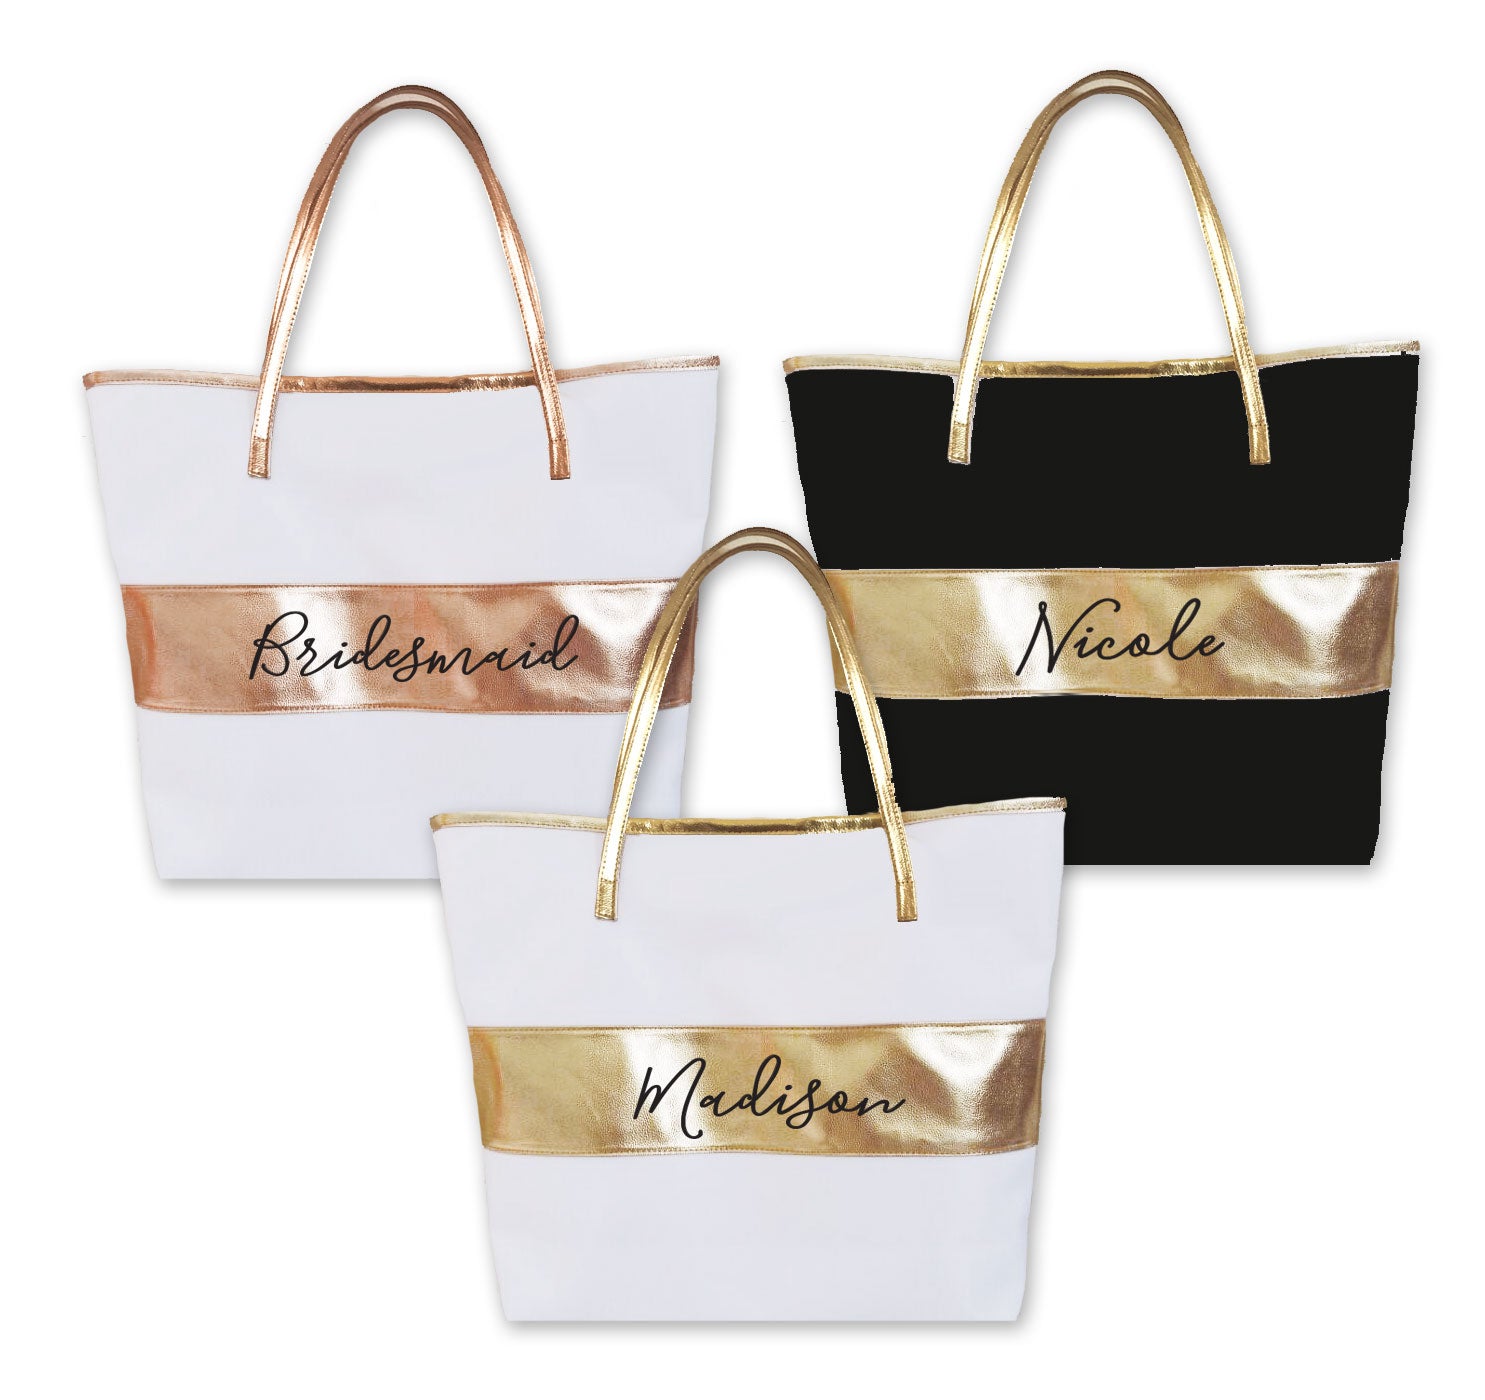 Personalized Floral Tote Bags Gift for Women w/Name Text Date - Customized  Totes Bag for Beach Wedding Travel Work - Custom Flower Shoulder Bag 